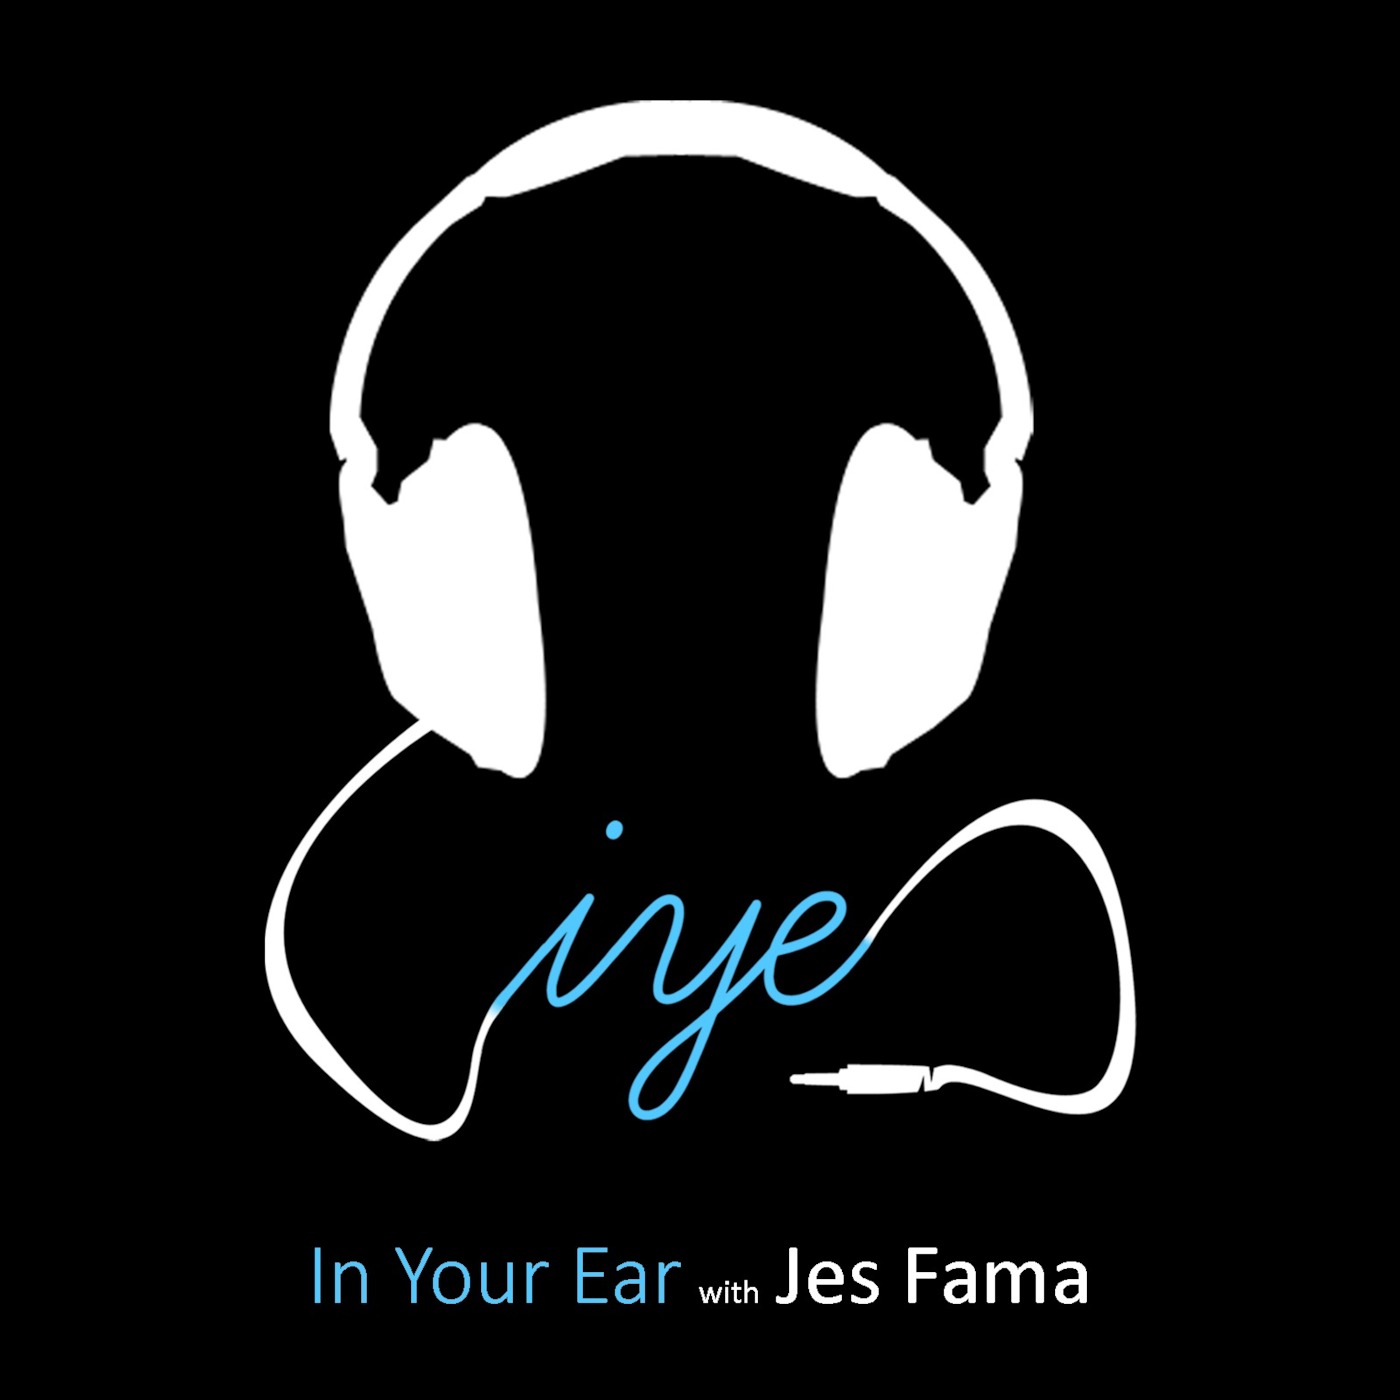 In Your Ear with Jes Fama